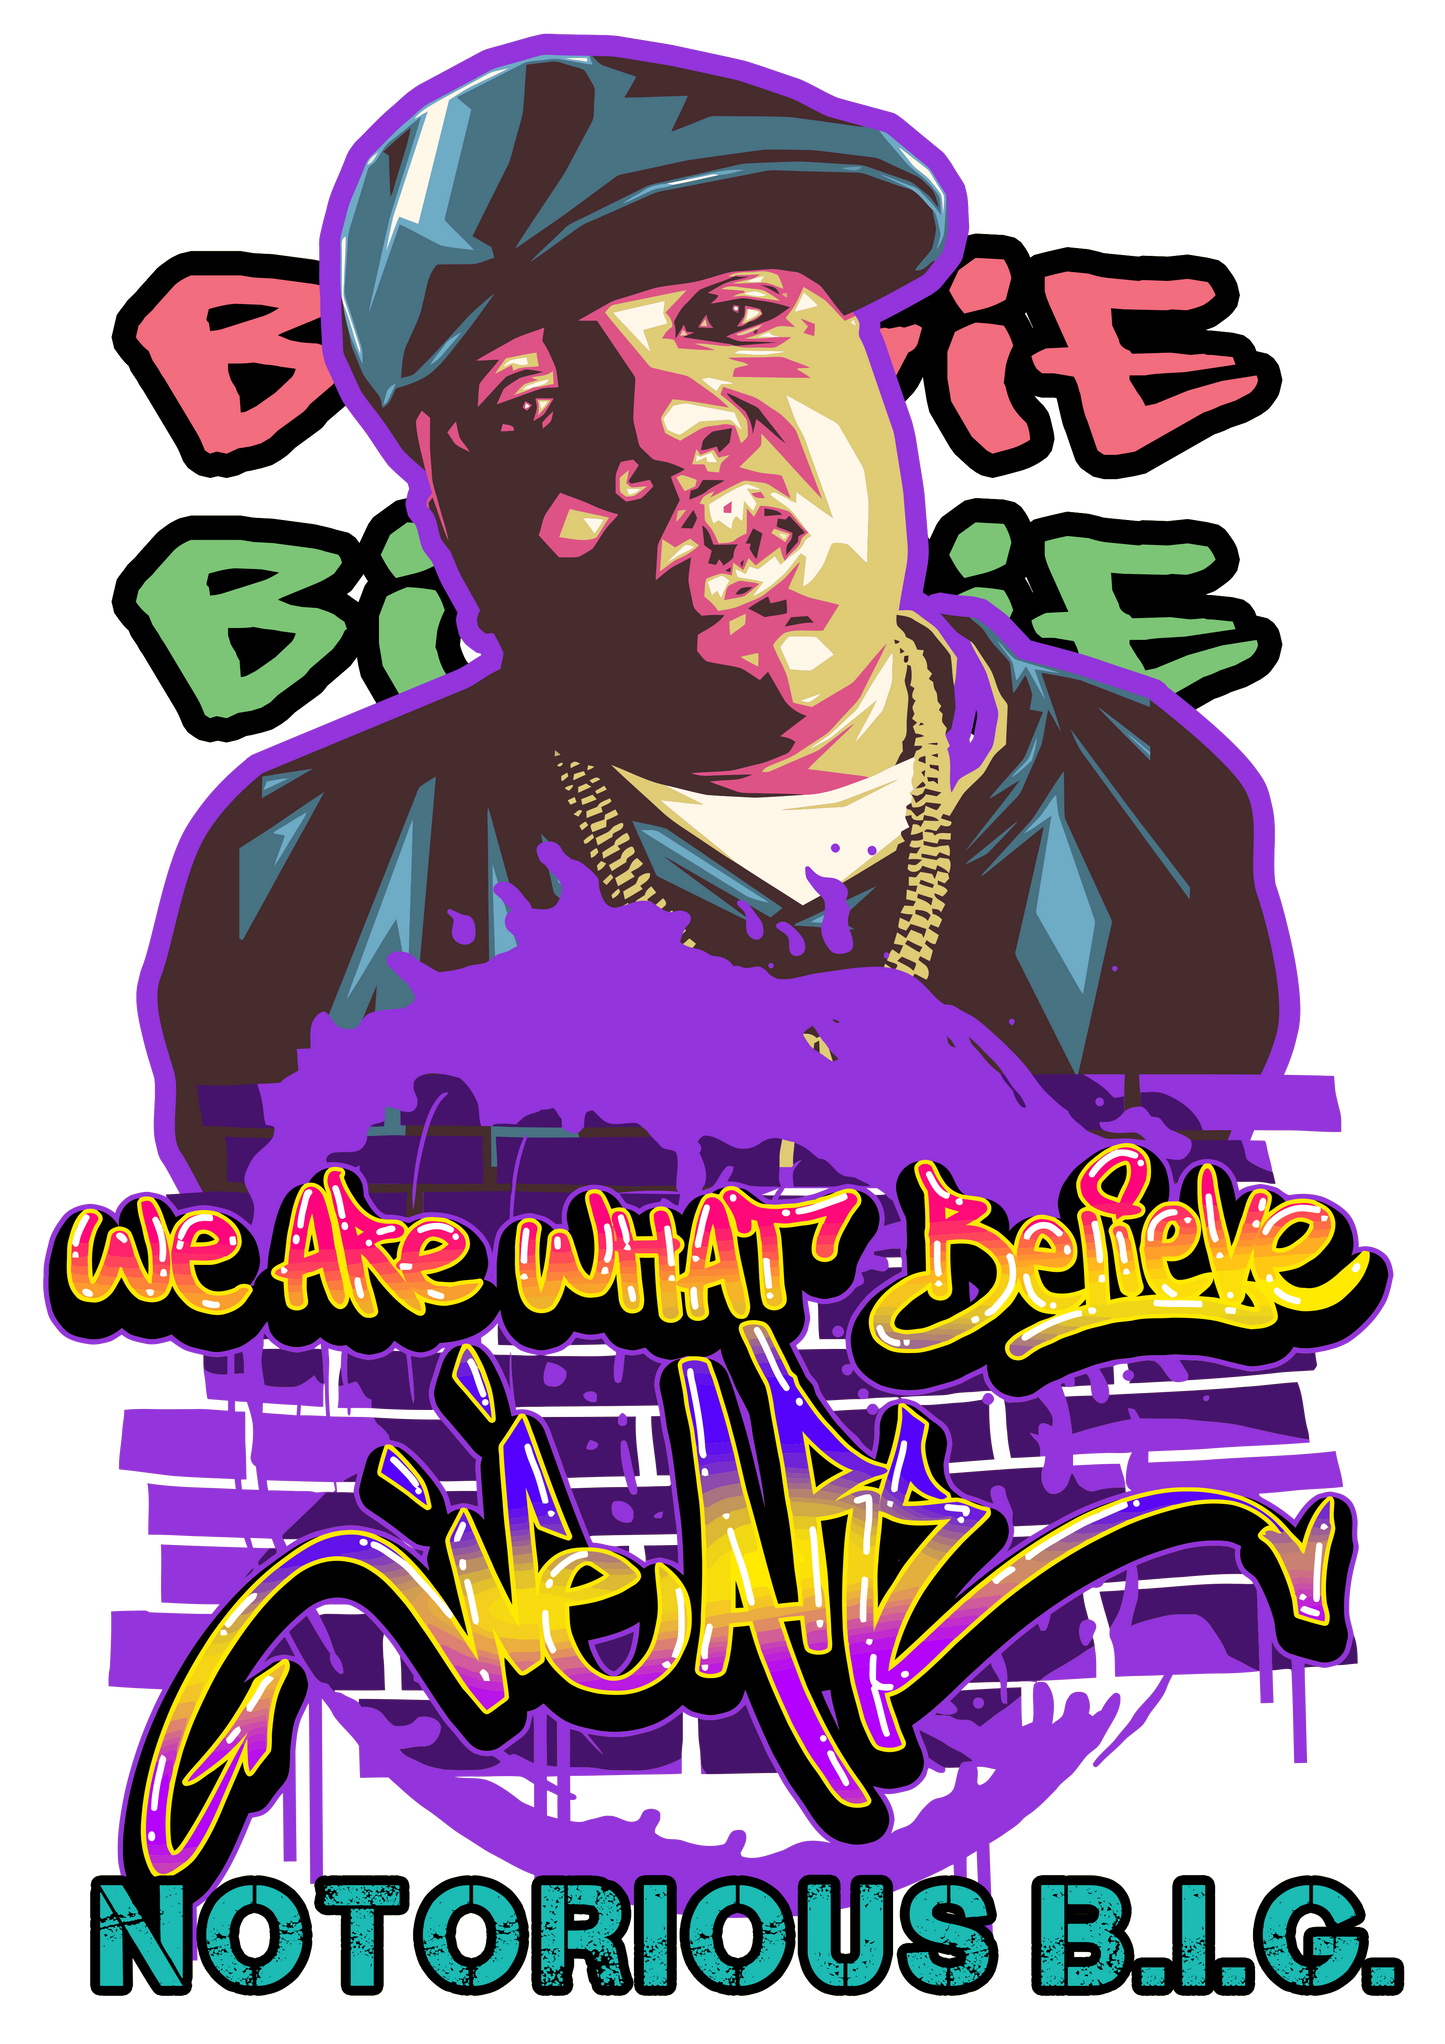 NOTORIOUS B.I.G WE ARE WHAT WE BELIEVE WE ARE